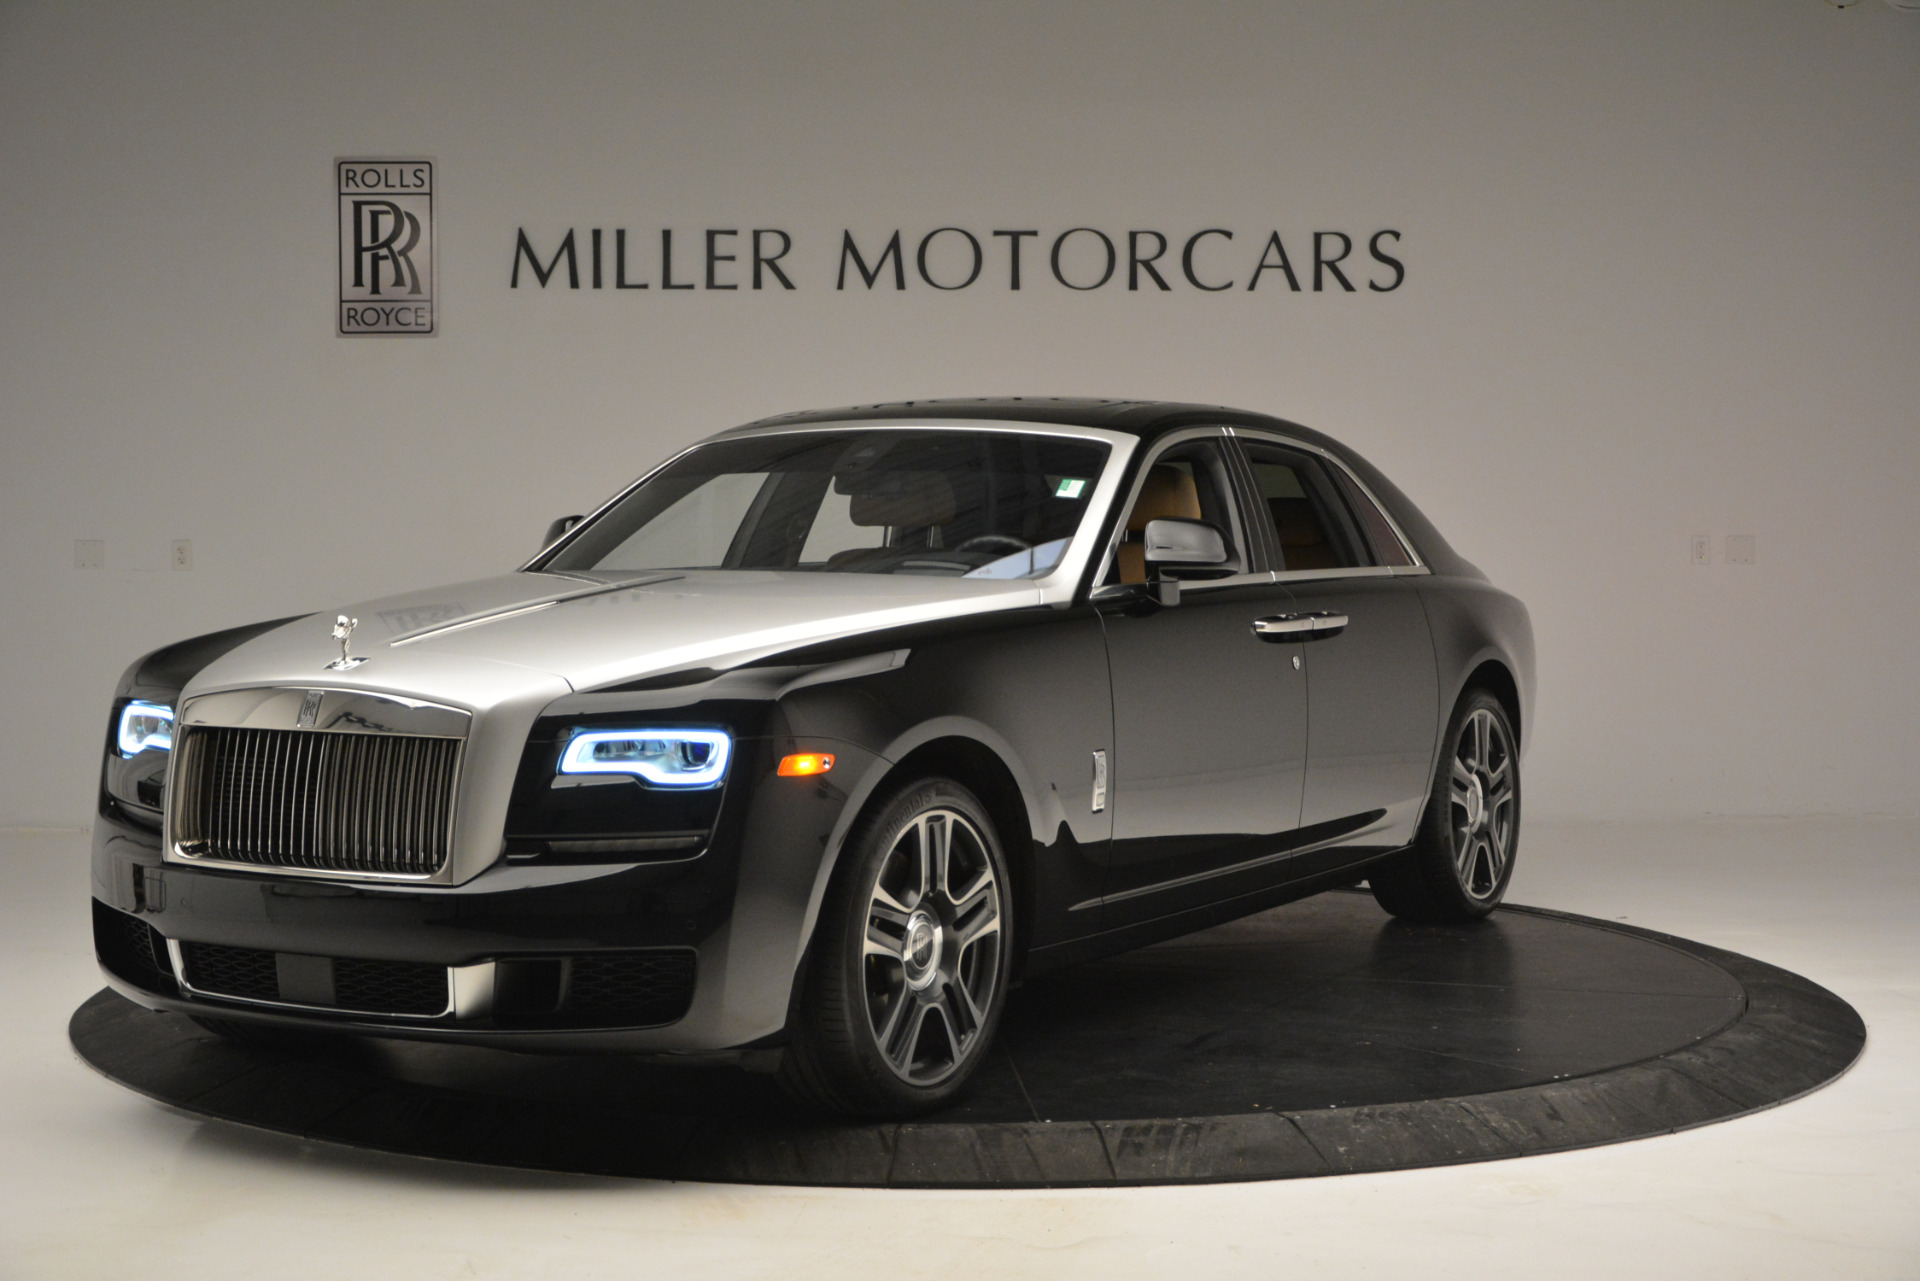 Used 2018 Rolls-Royce Ghost for sale Sold at Pagani of Greenwich in Greenwich CT 06830 1